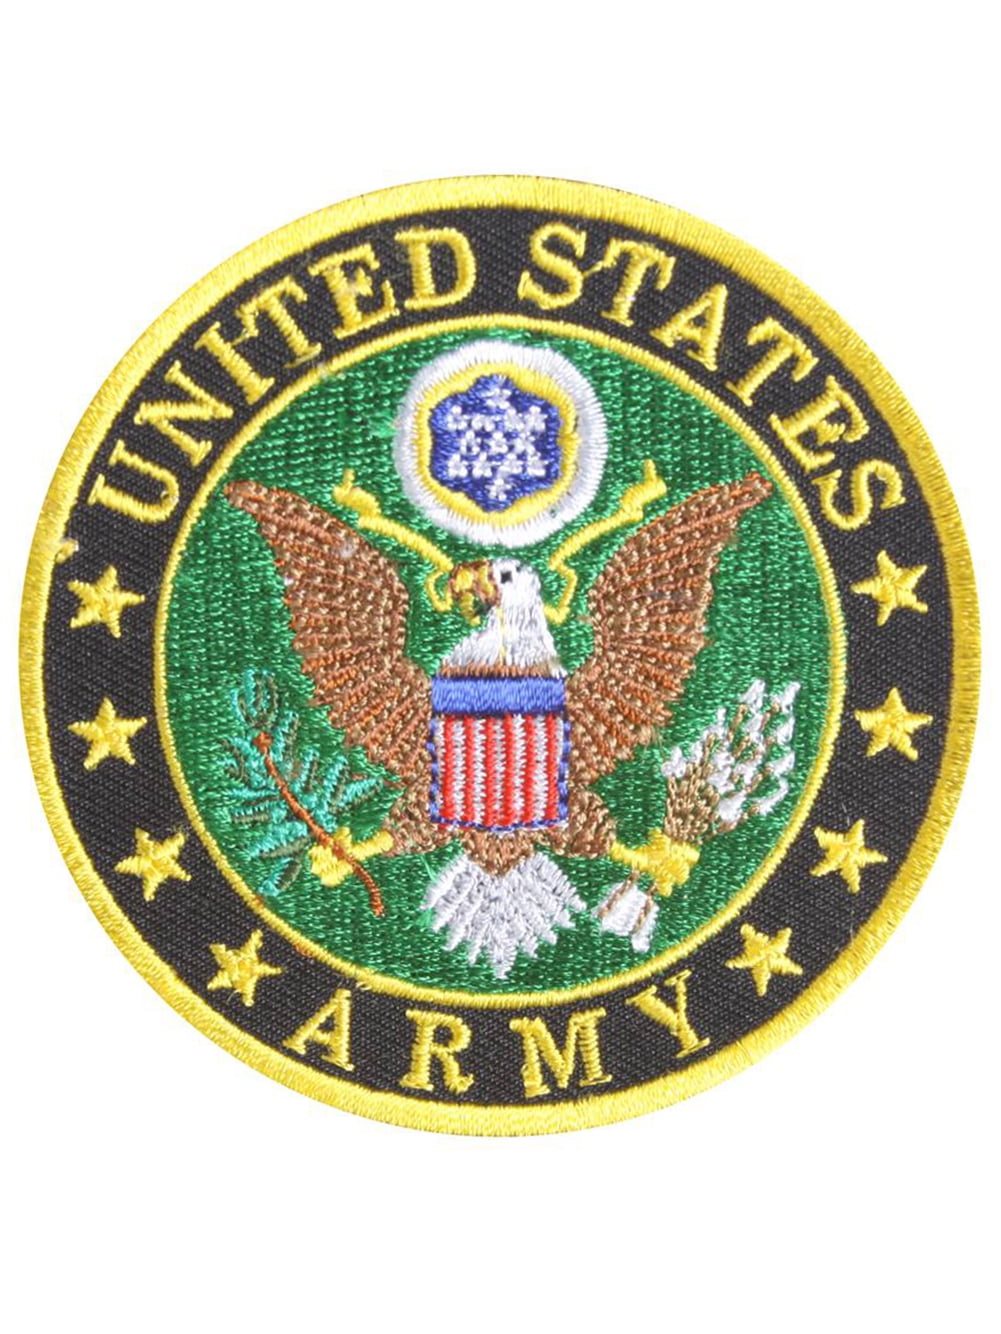 Army Seal & Emblem Iron On Sew On Embroidered Patch 2"x 3 " U.S 